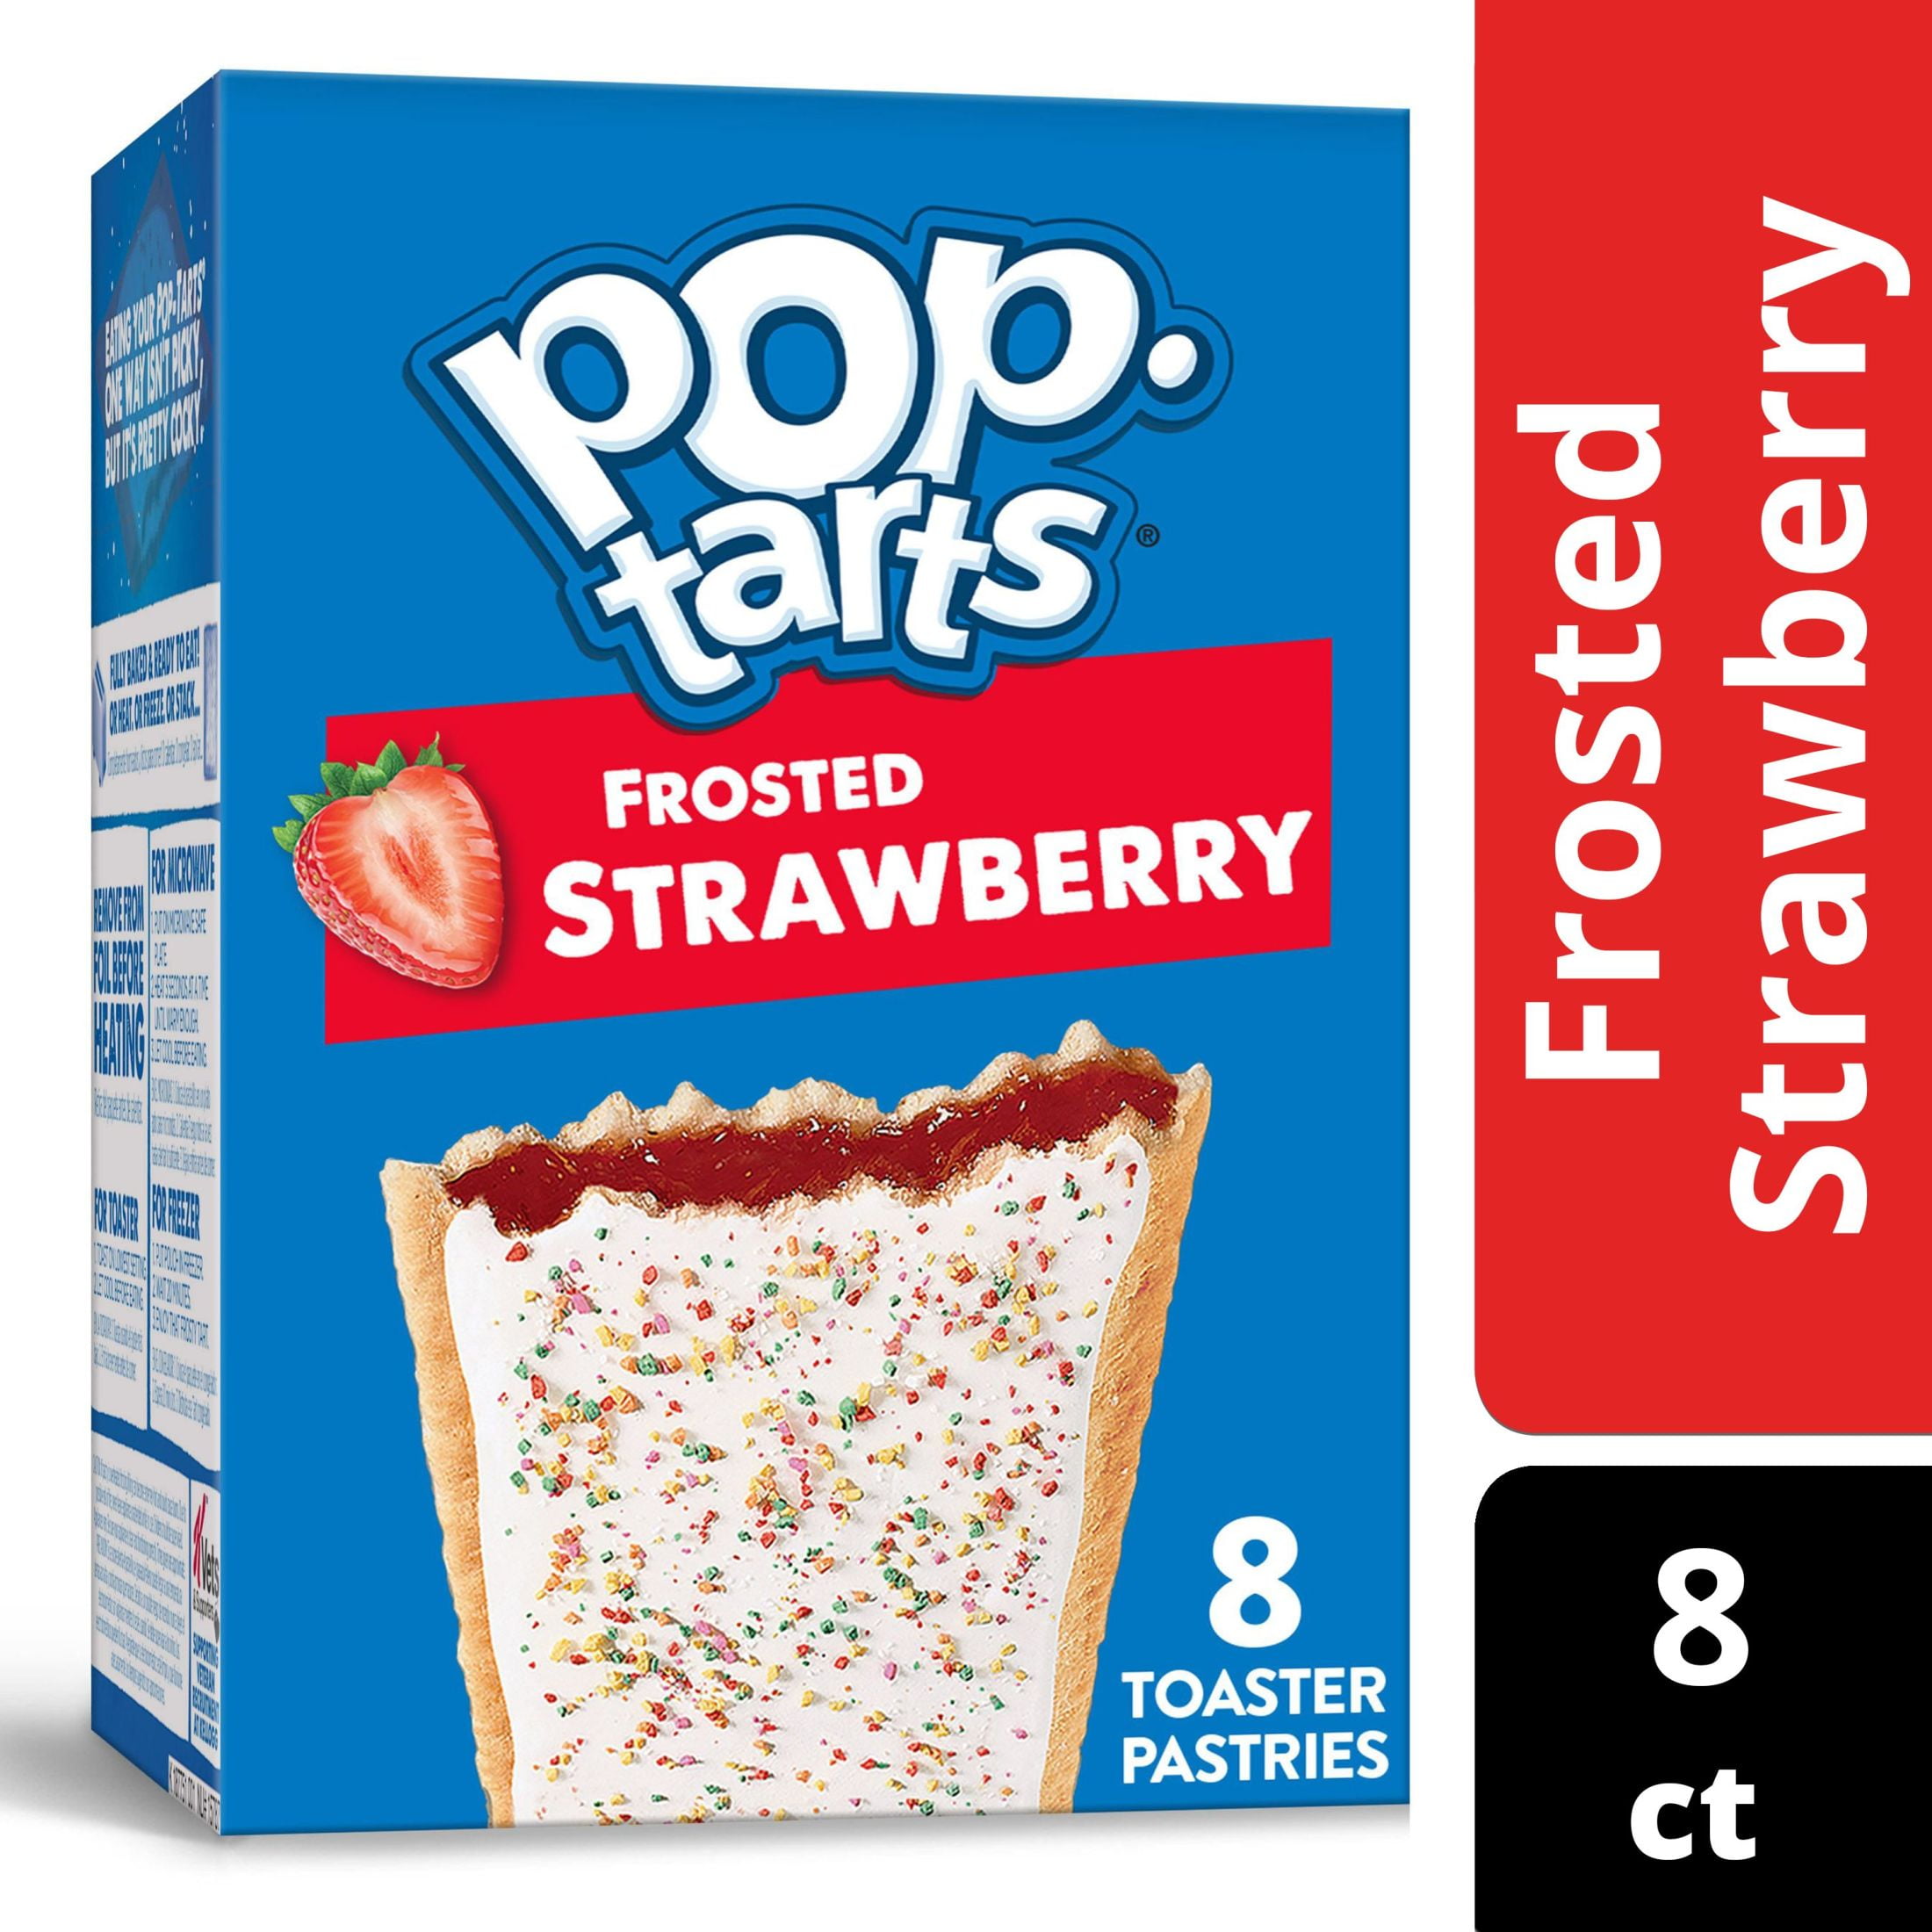 Delicious Pop-Tarts Frosted Strawberry Toaster Pastries, 8 Count Box, 13.5  oz, Ready-to-Eat